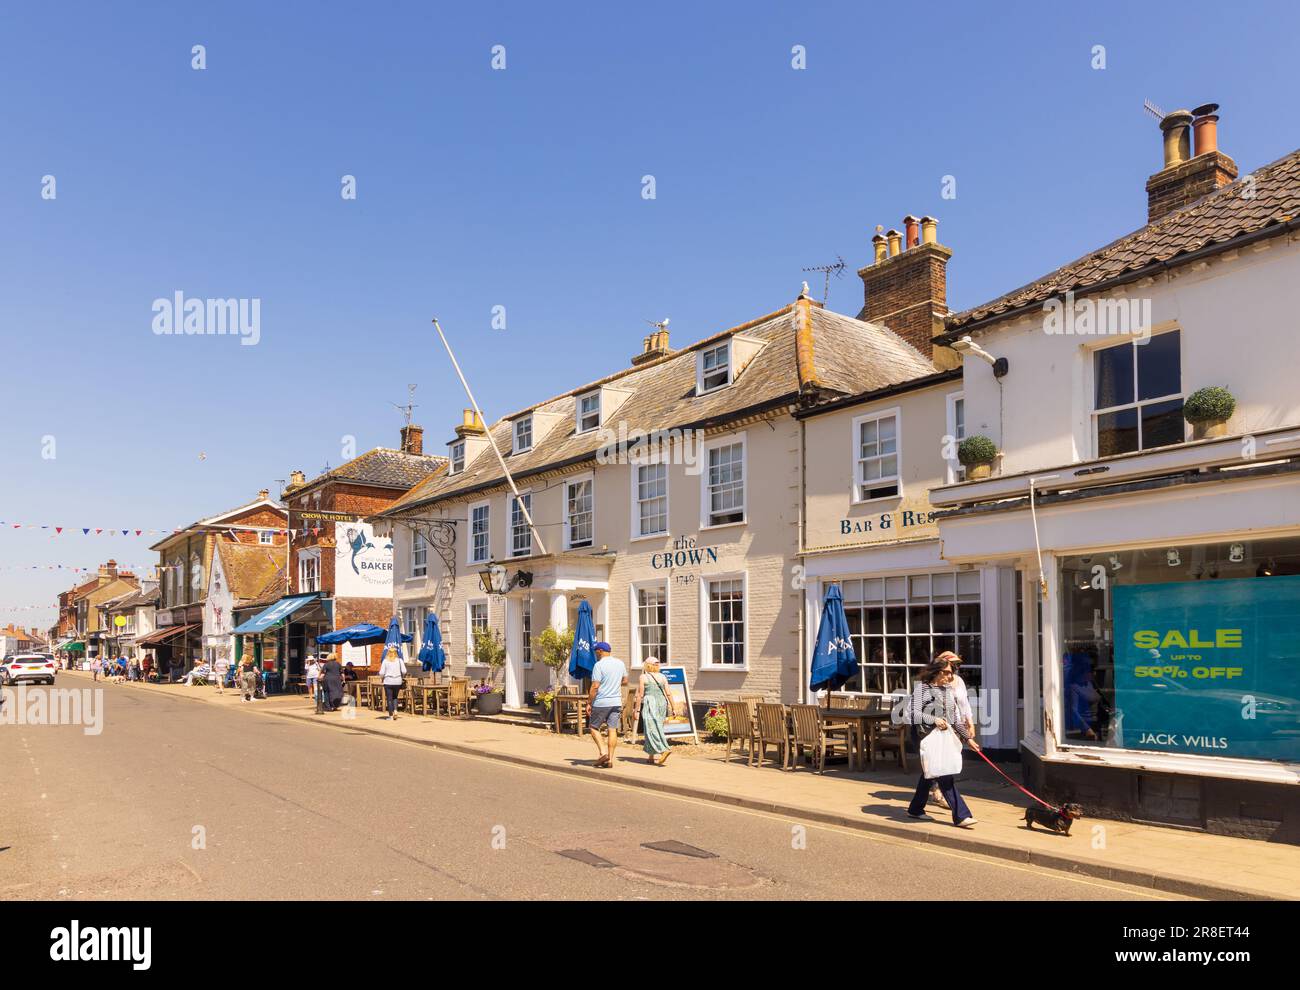 View of the Crown Hotel and shops in Southwold High Street, Suffolk. UK. Stock Photo